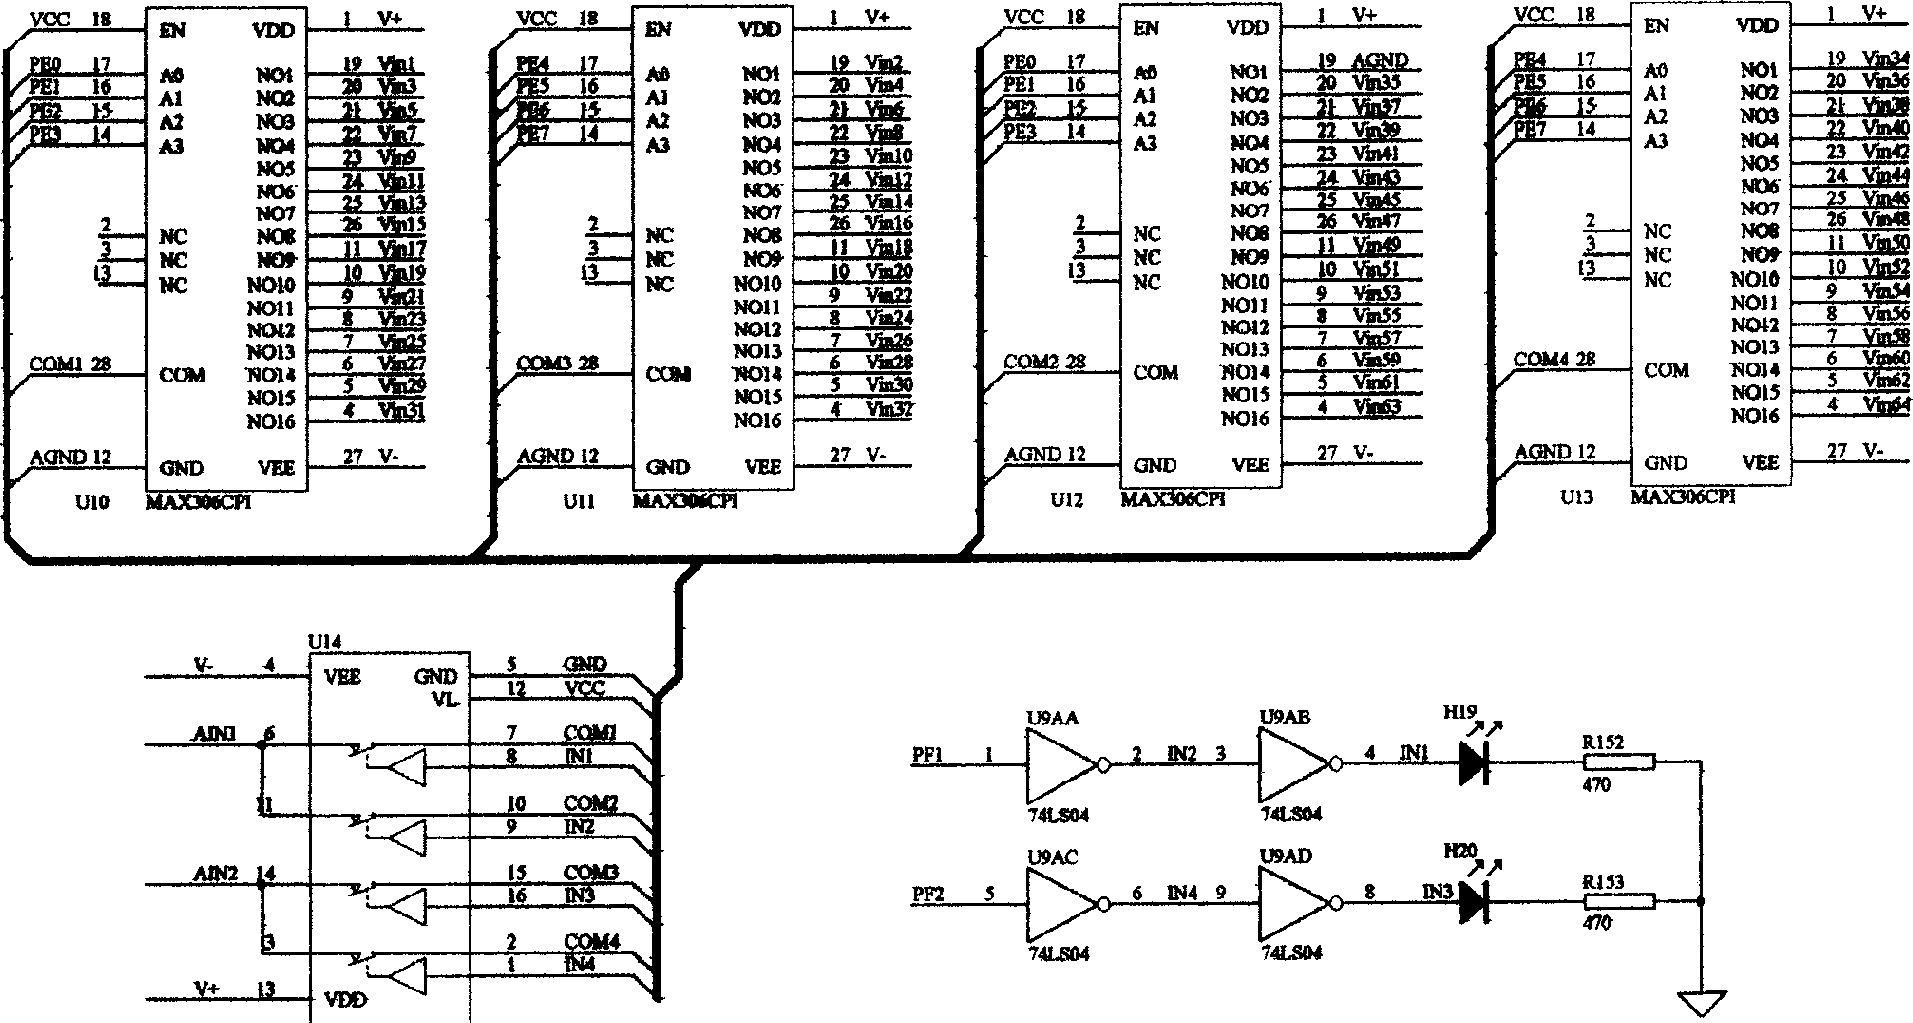 Single chip voltage monitor for vehicle fuel cell stack